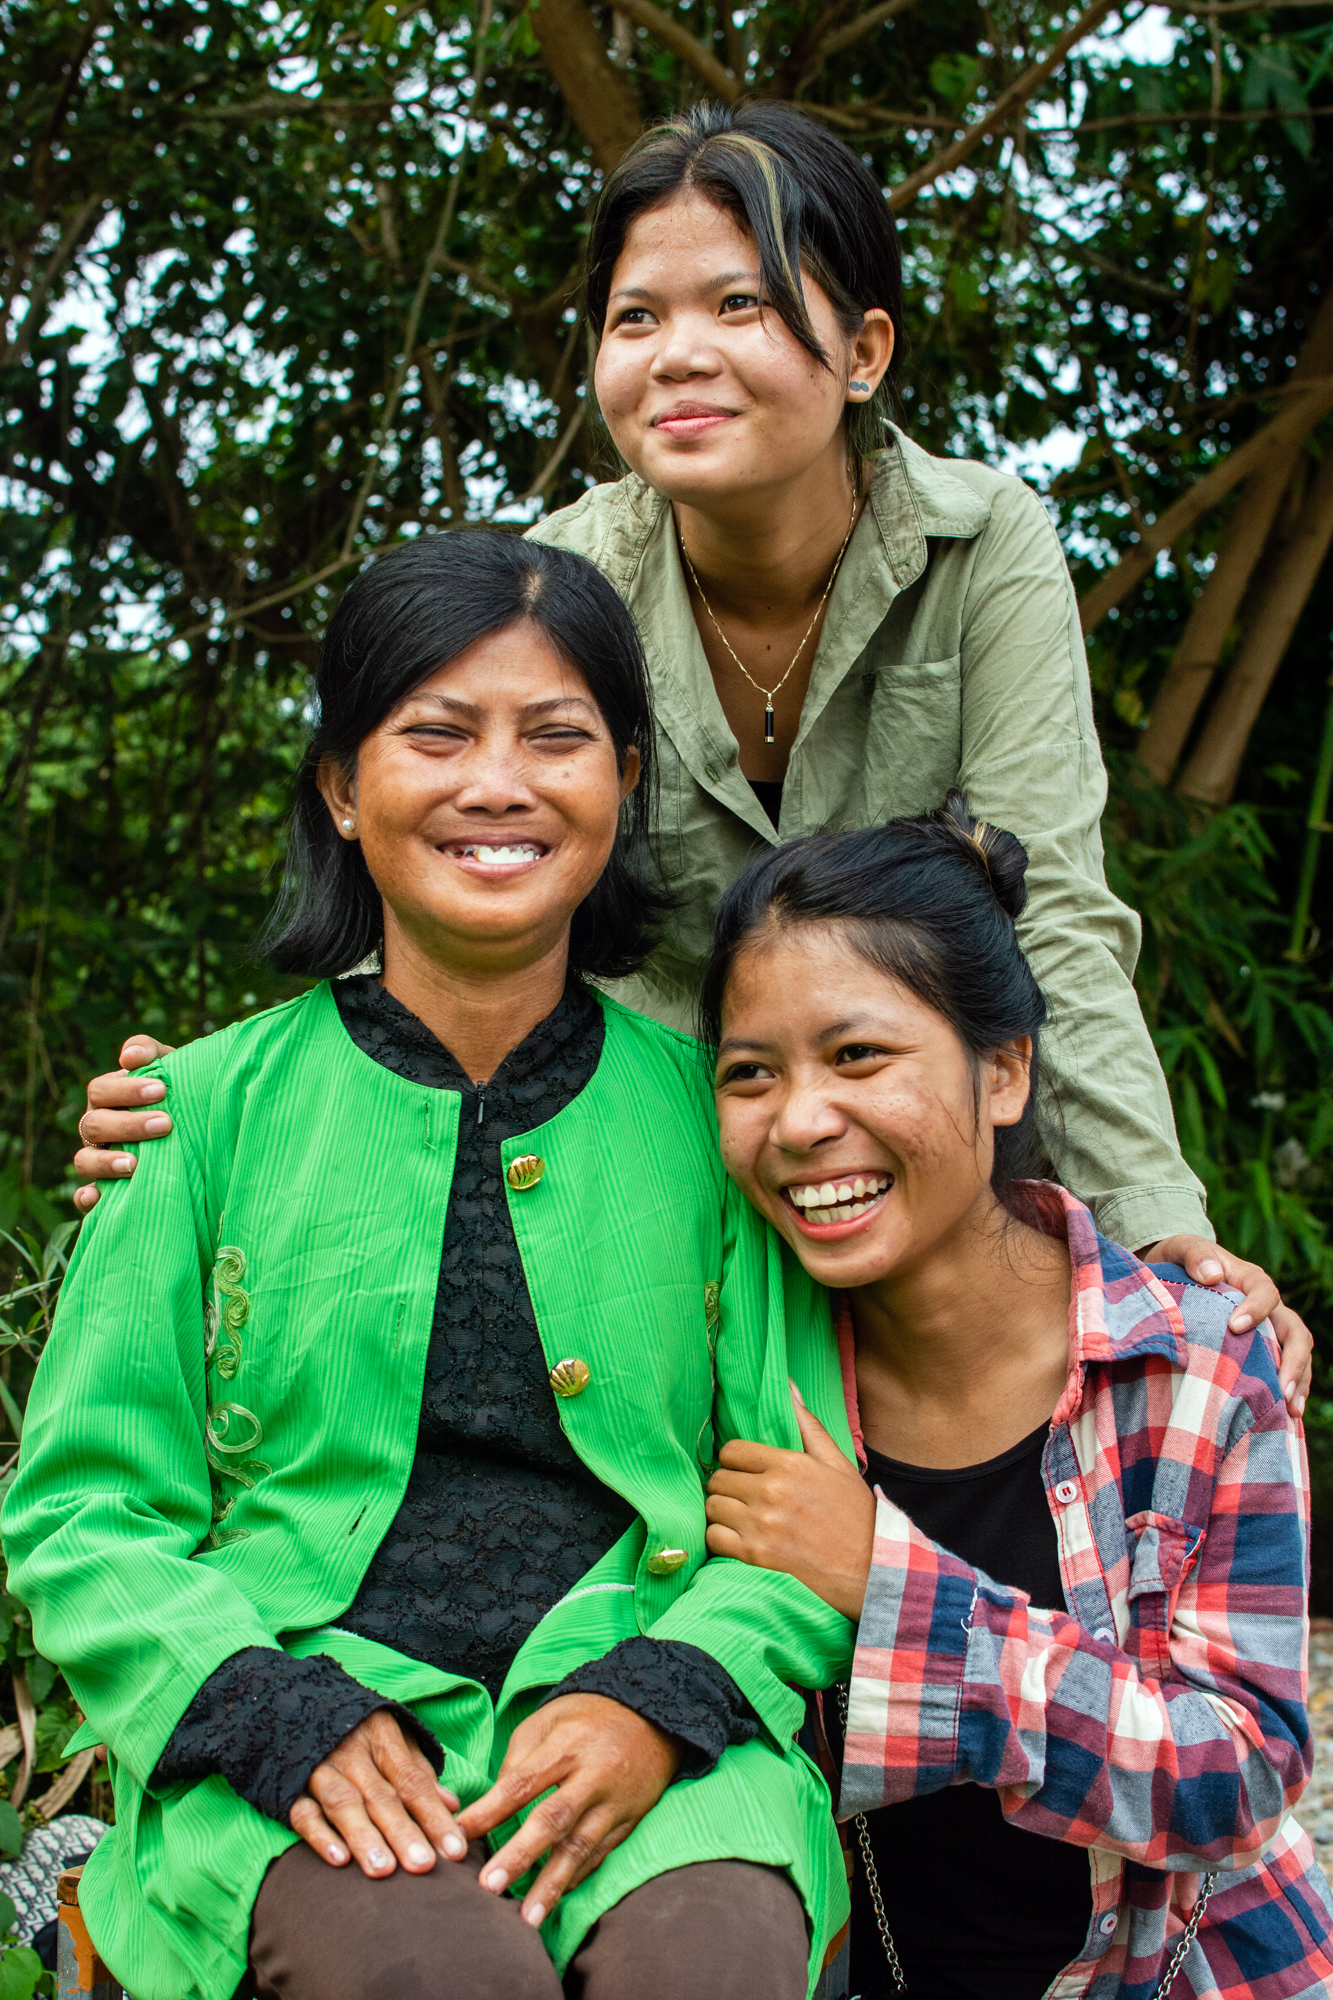 A supportive family of three smiling. A mother and two teenage daughters